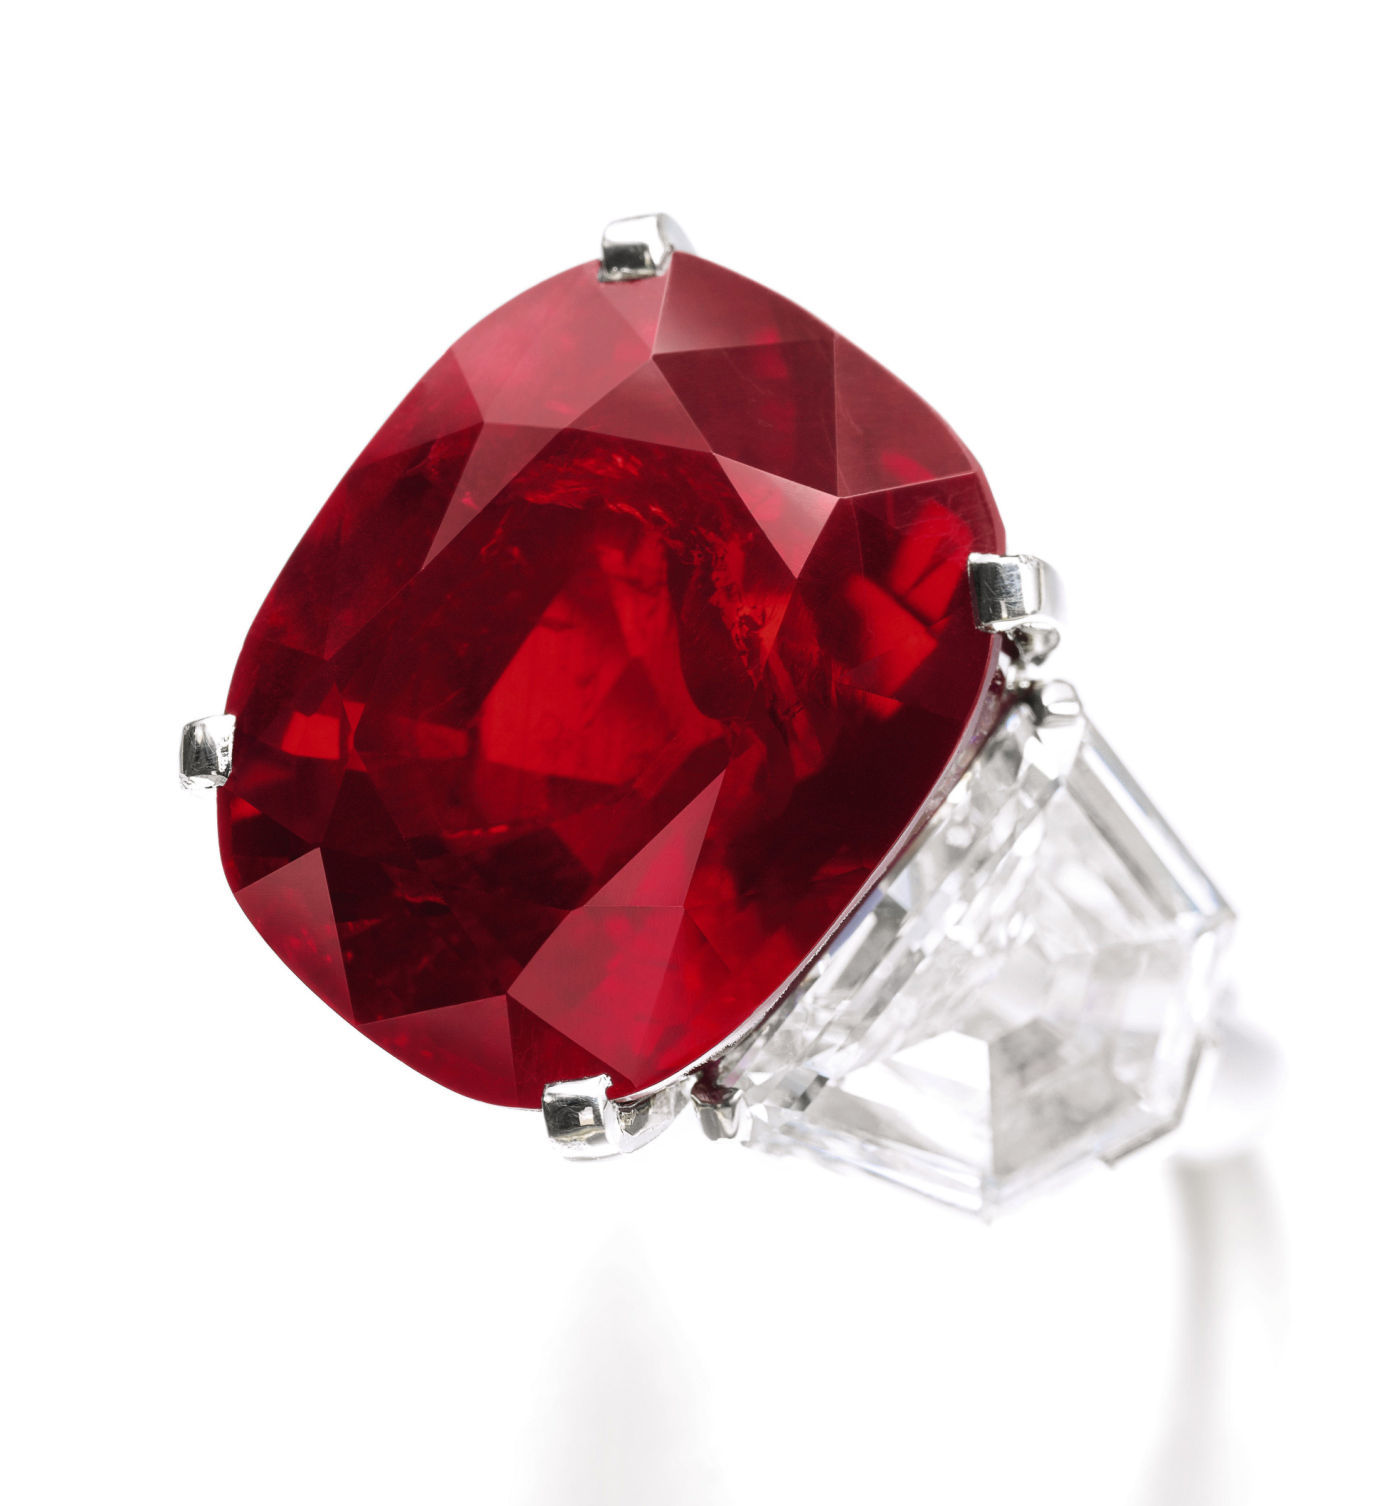 The Sunrise Ruby' sale breaks world auction record